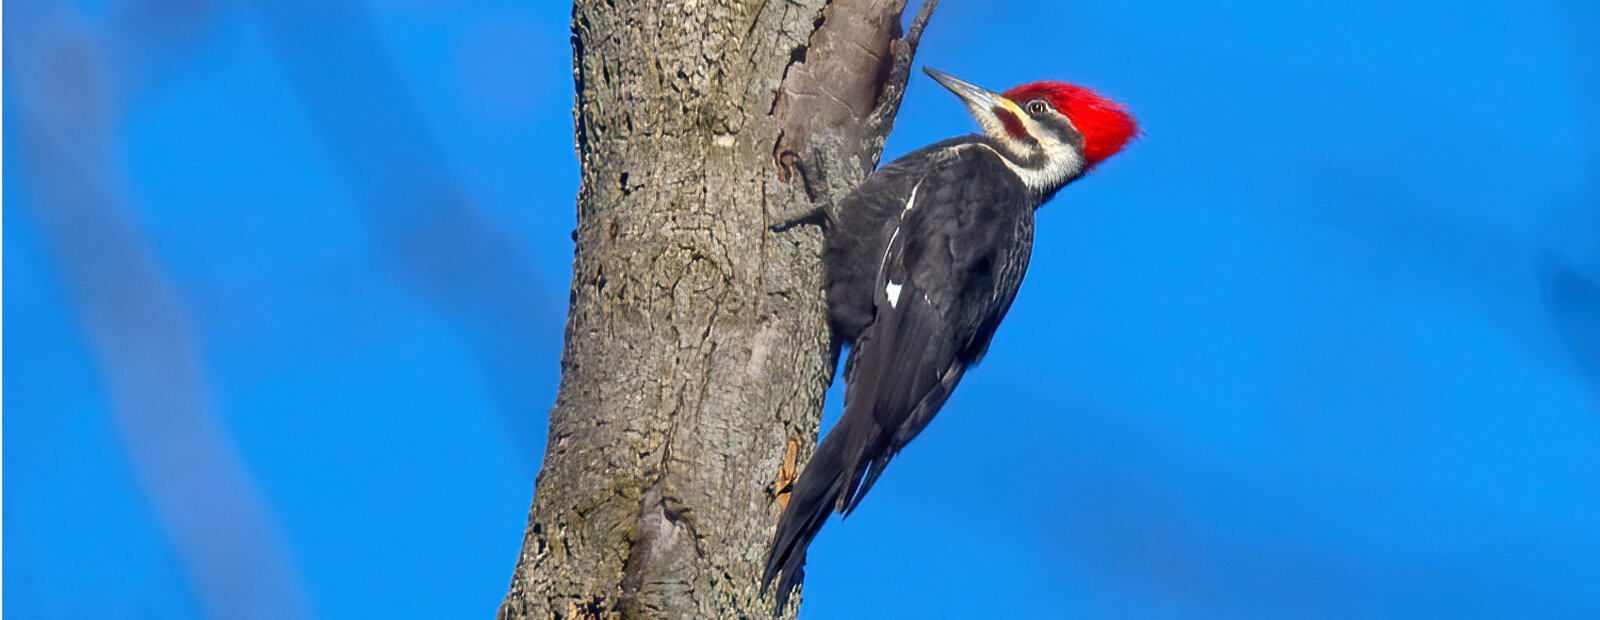 A Pileated Woodpecker at Old Woman Creek State Nature Preserve